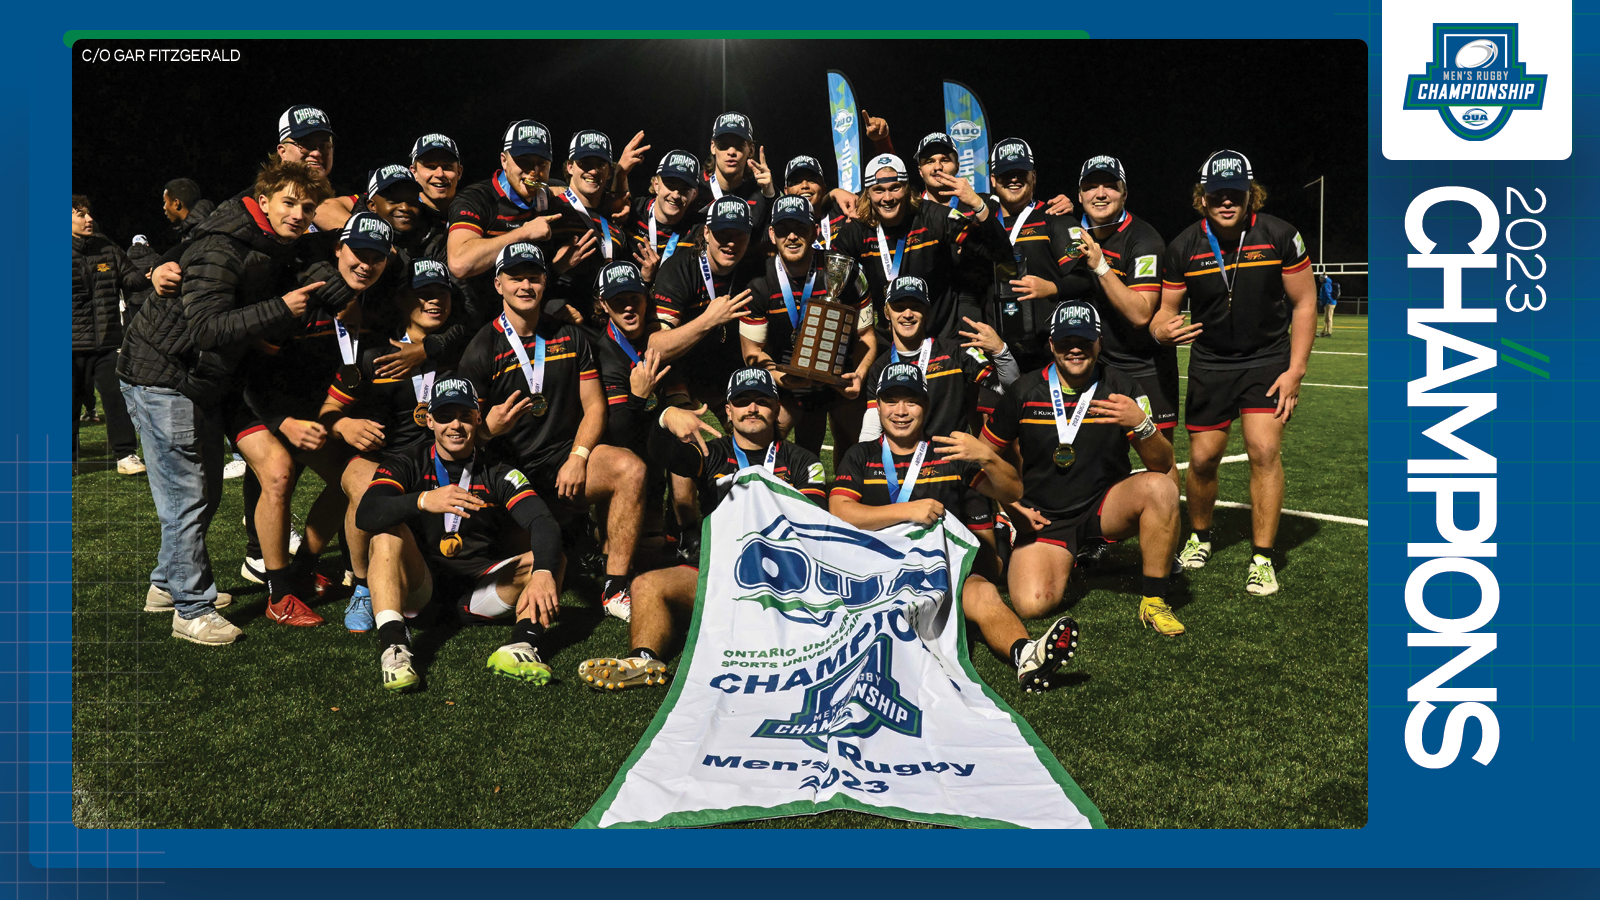 Predominantly blue graphic covered mostly by 2023 OUA Men's Rugby Championship banner photo, with the corresponding championship logo and white text reading '2023 Champions' on the right side